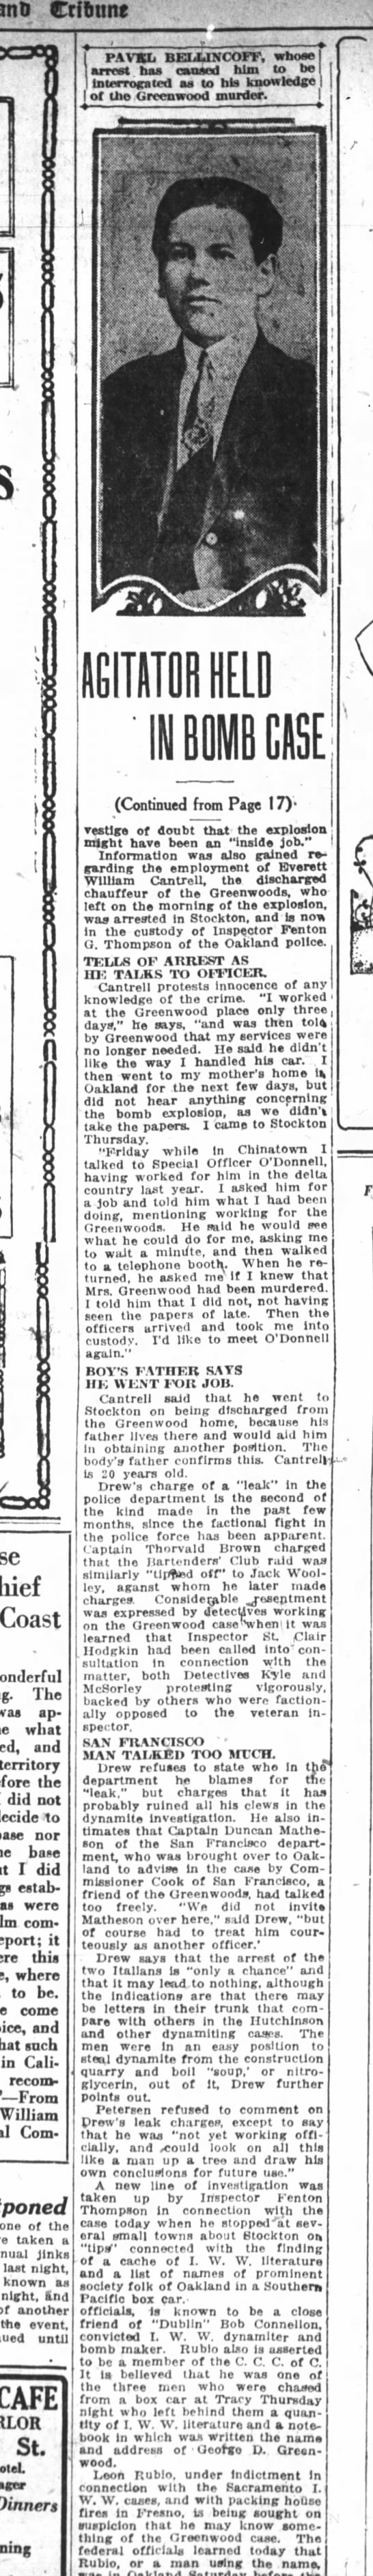 Four Held in Bomb Case - Oakland Tribune March 23, 1919 - 